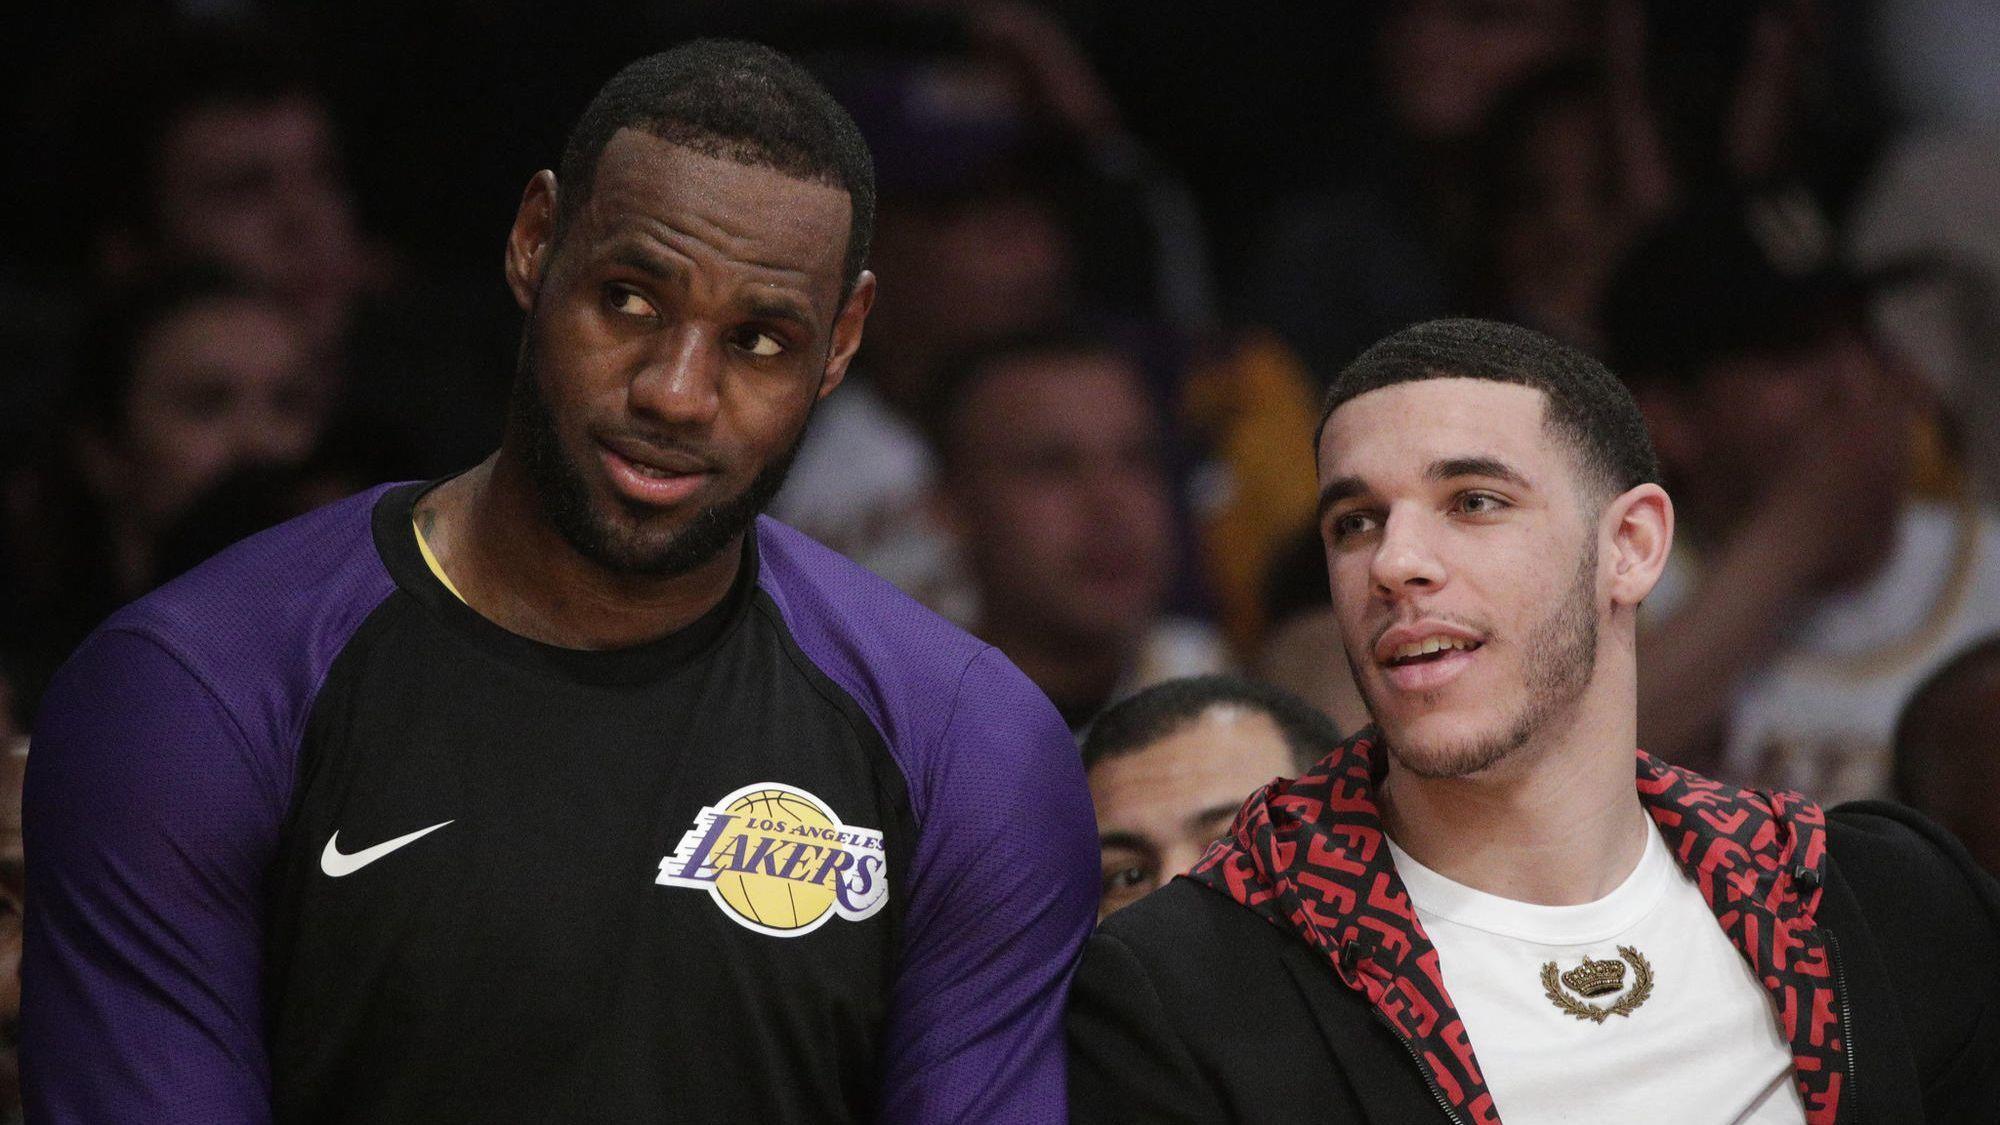 Lakers Held Team Meeting And Called Out LeBron James For His Body Language